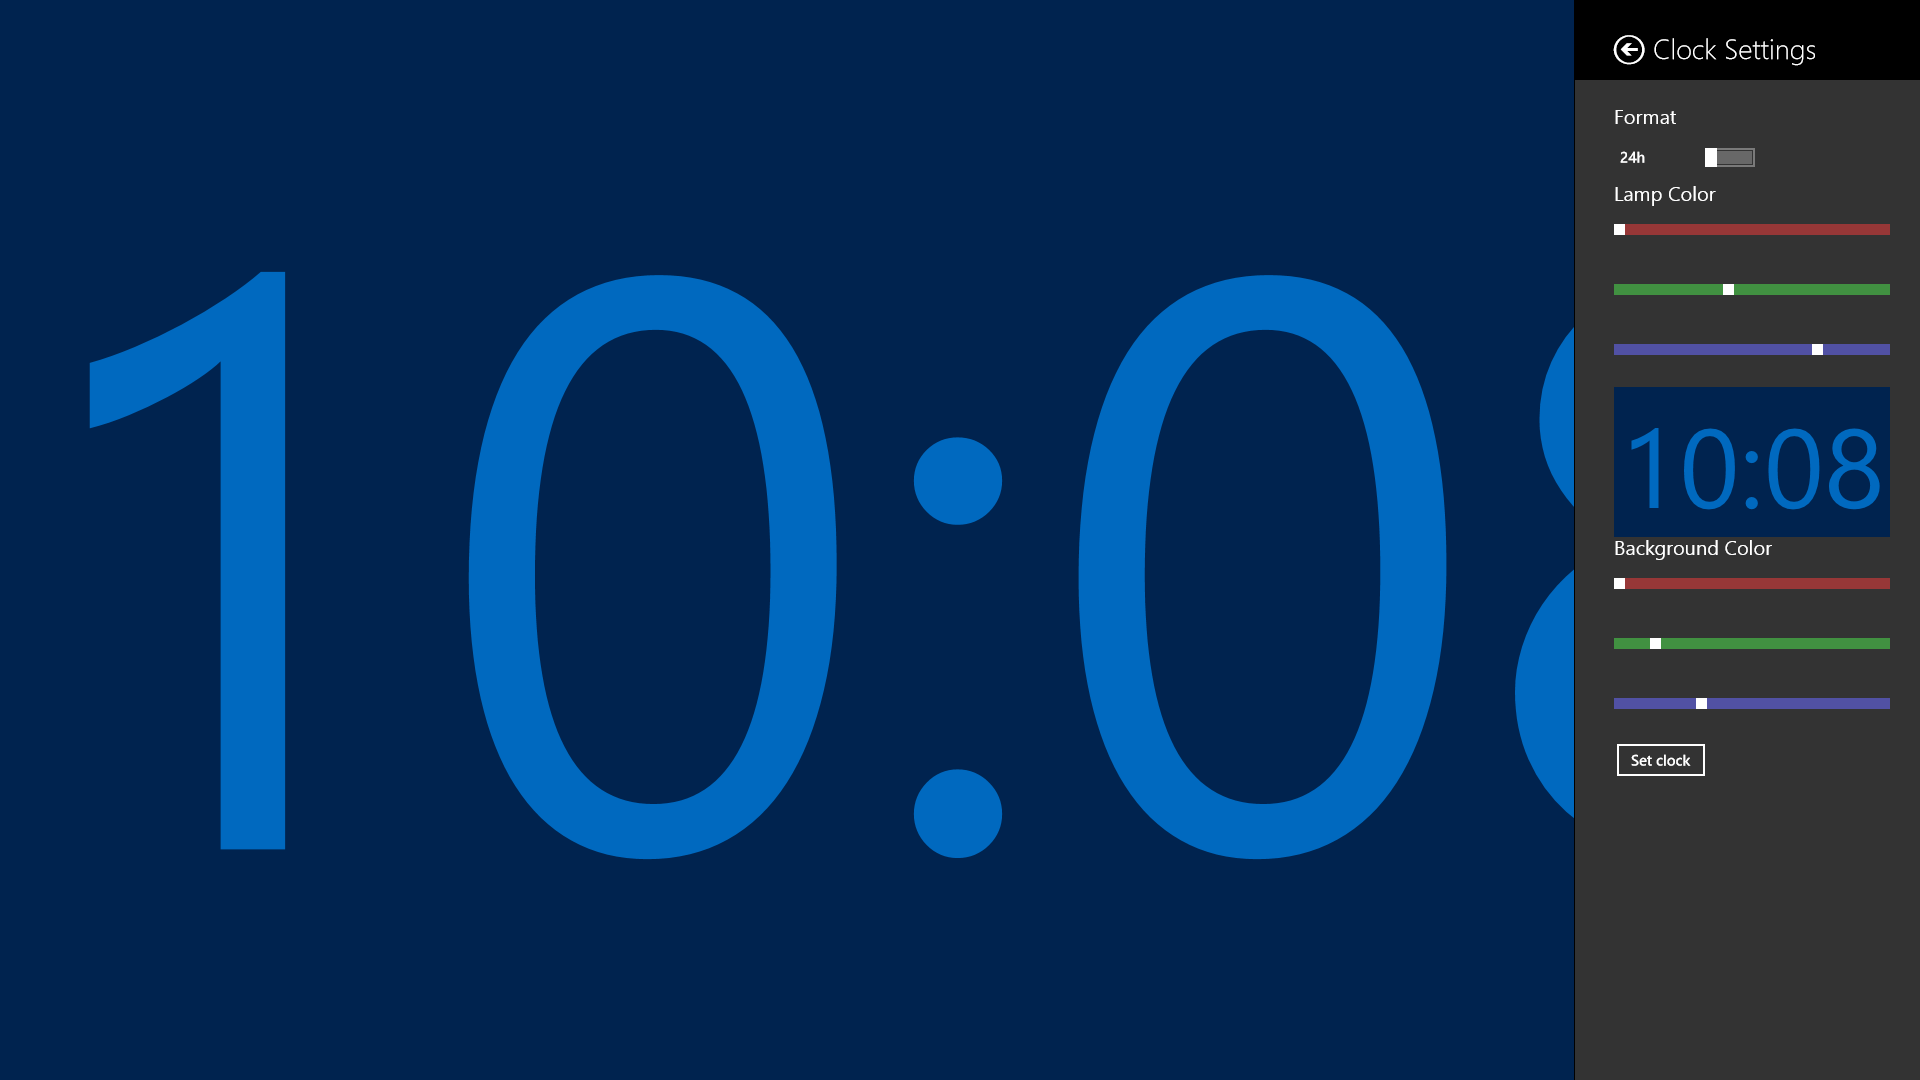 You can also fully customize the clock color to your liking